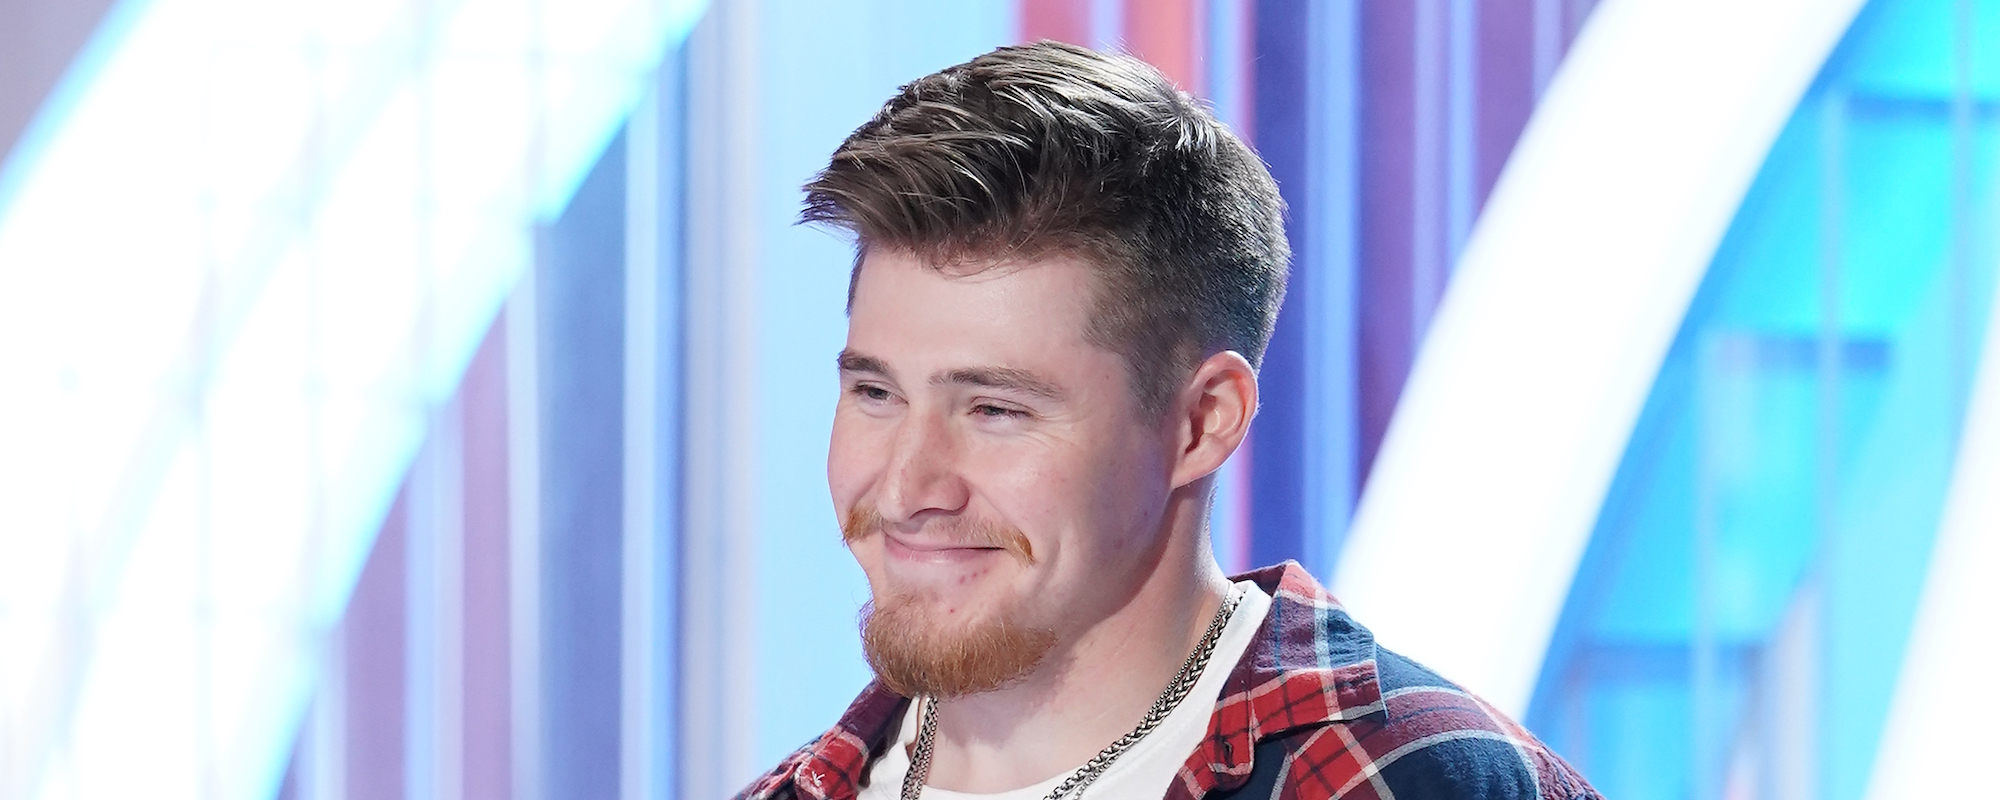 Country Singer Colt Glover Takes on Flatt & Scruggs’ 1965 Song “Rock Salt and Nails” on ‘American Idol’